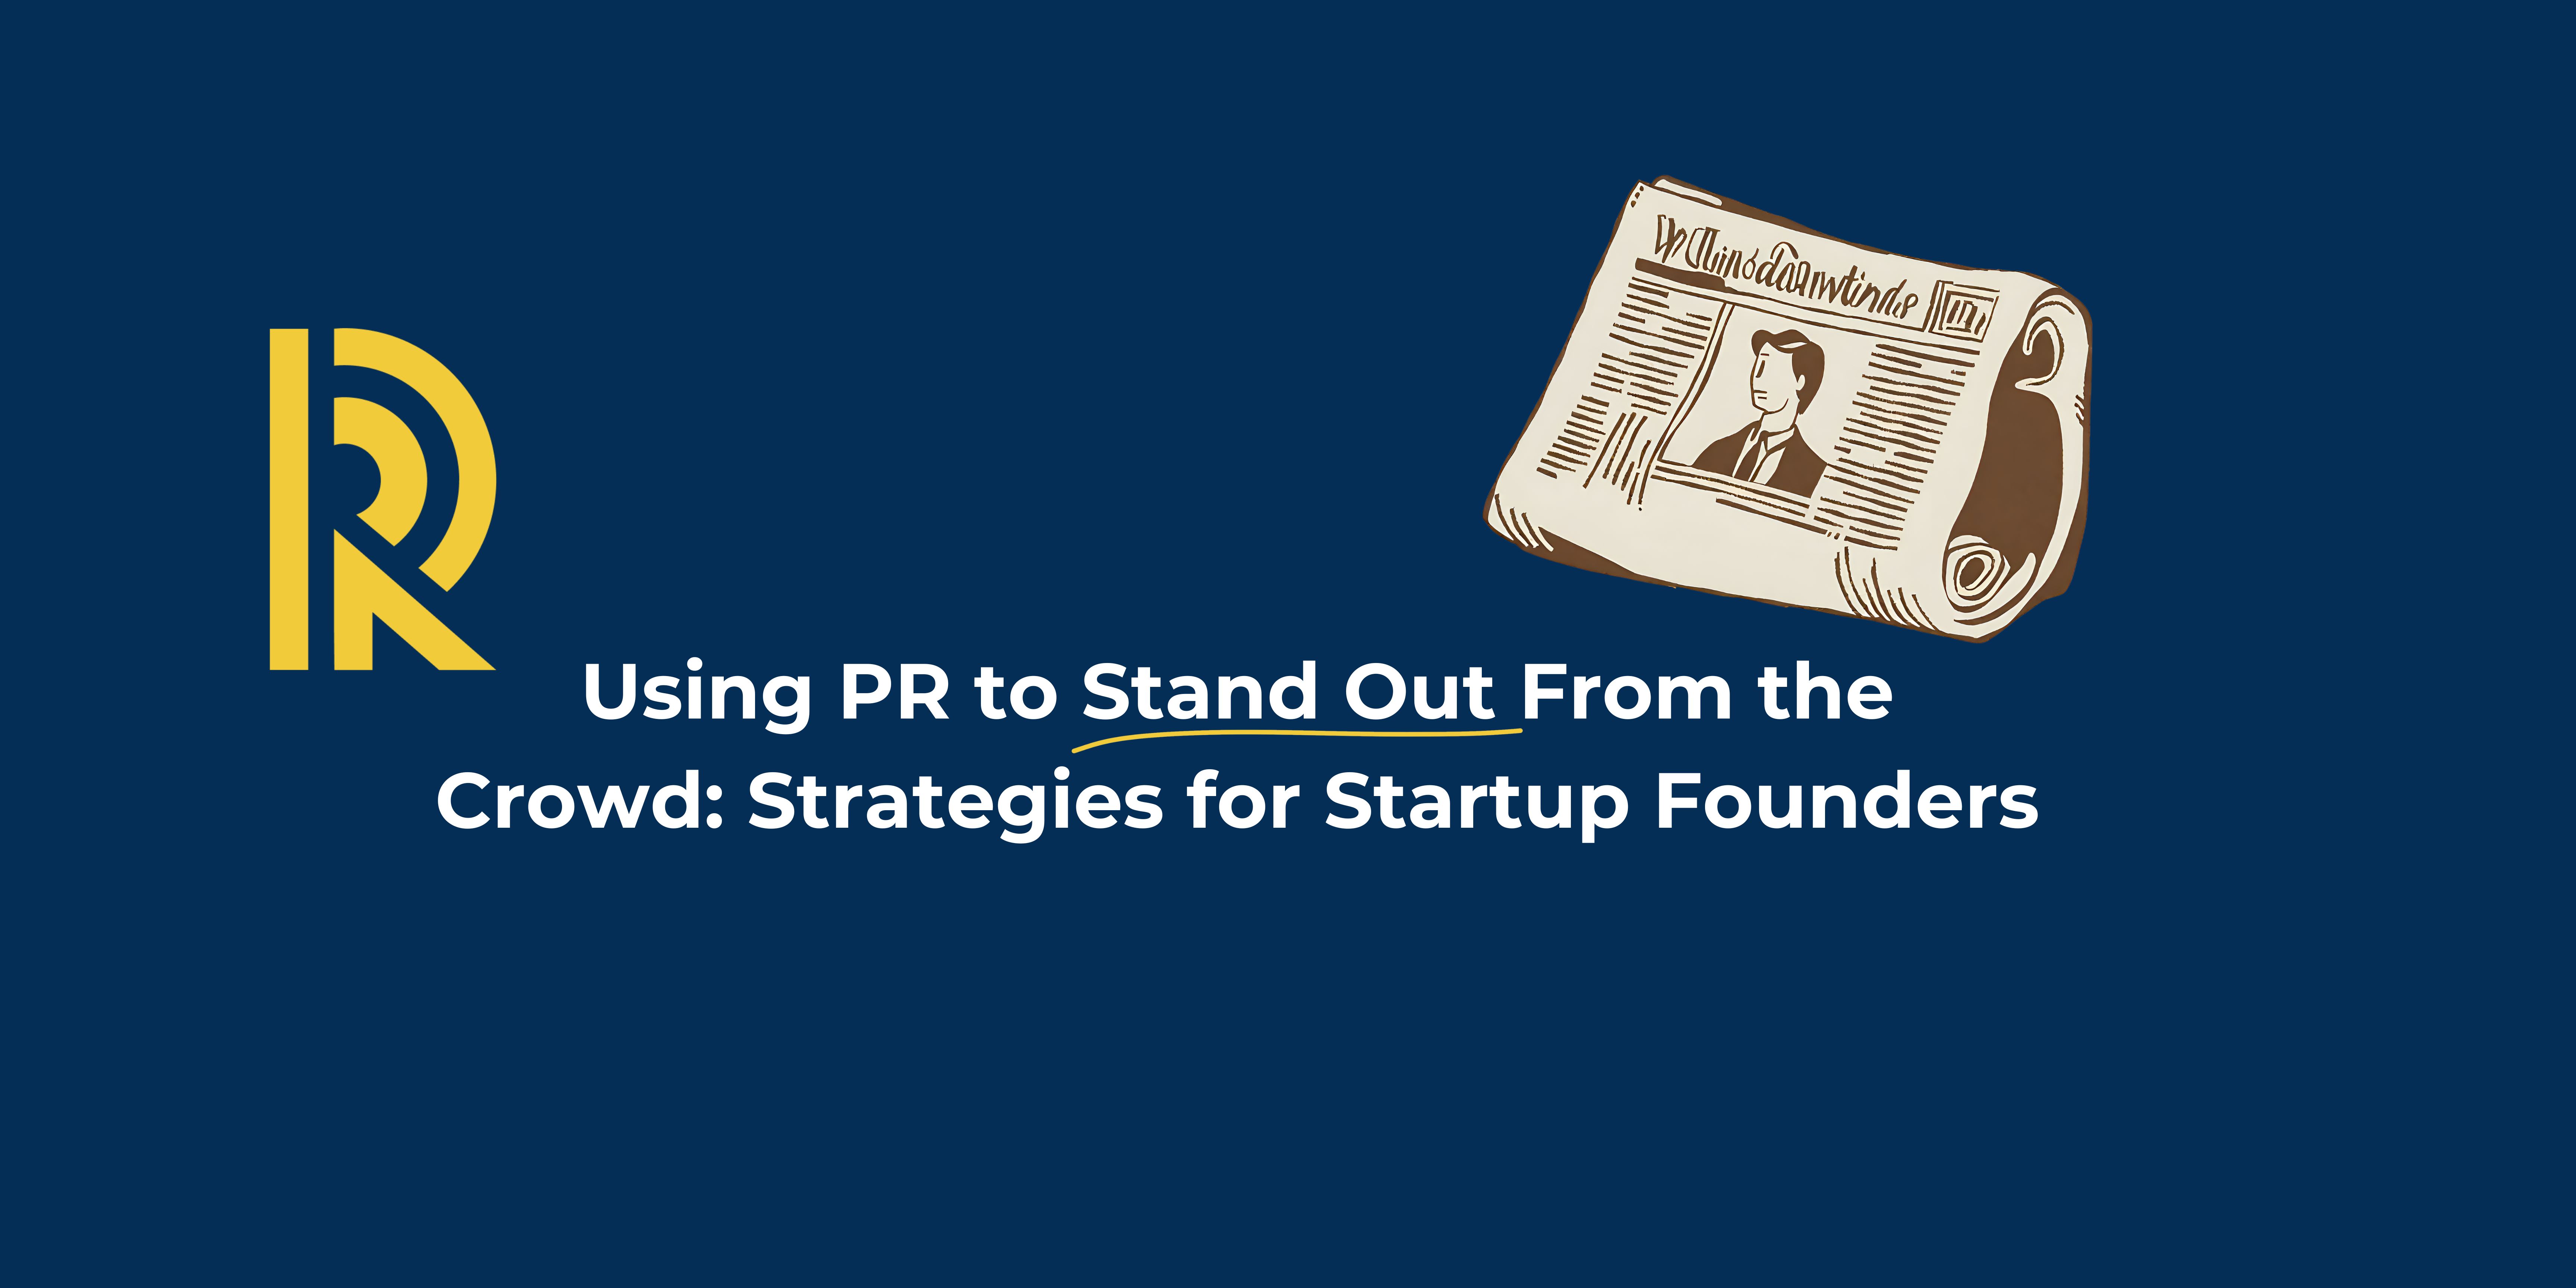 Using PR to Stand Out From the Crowd: Strategies for Startup Founders